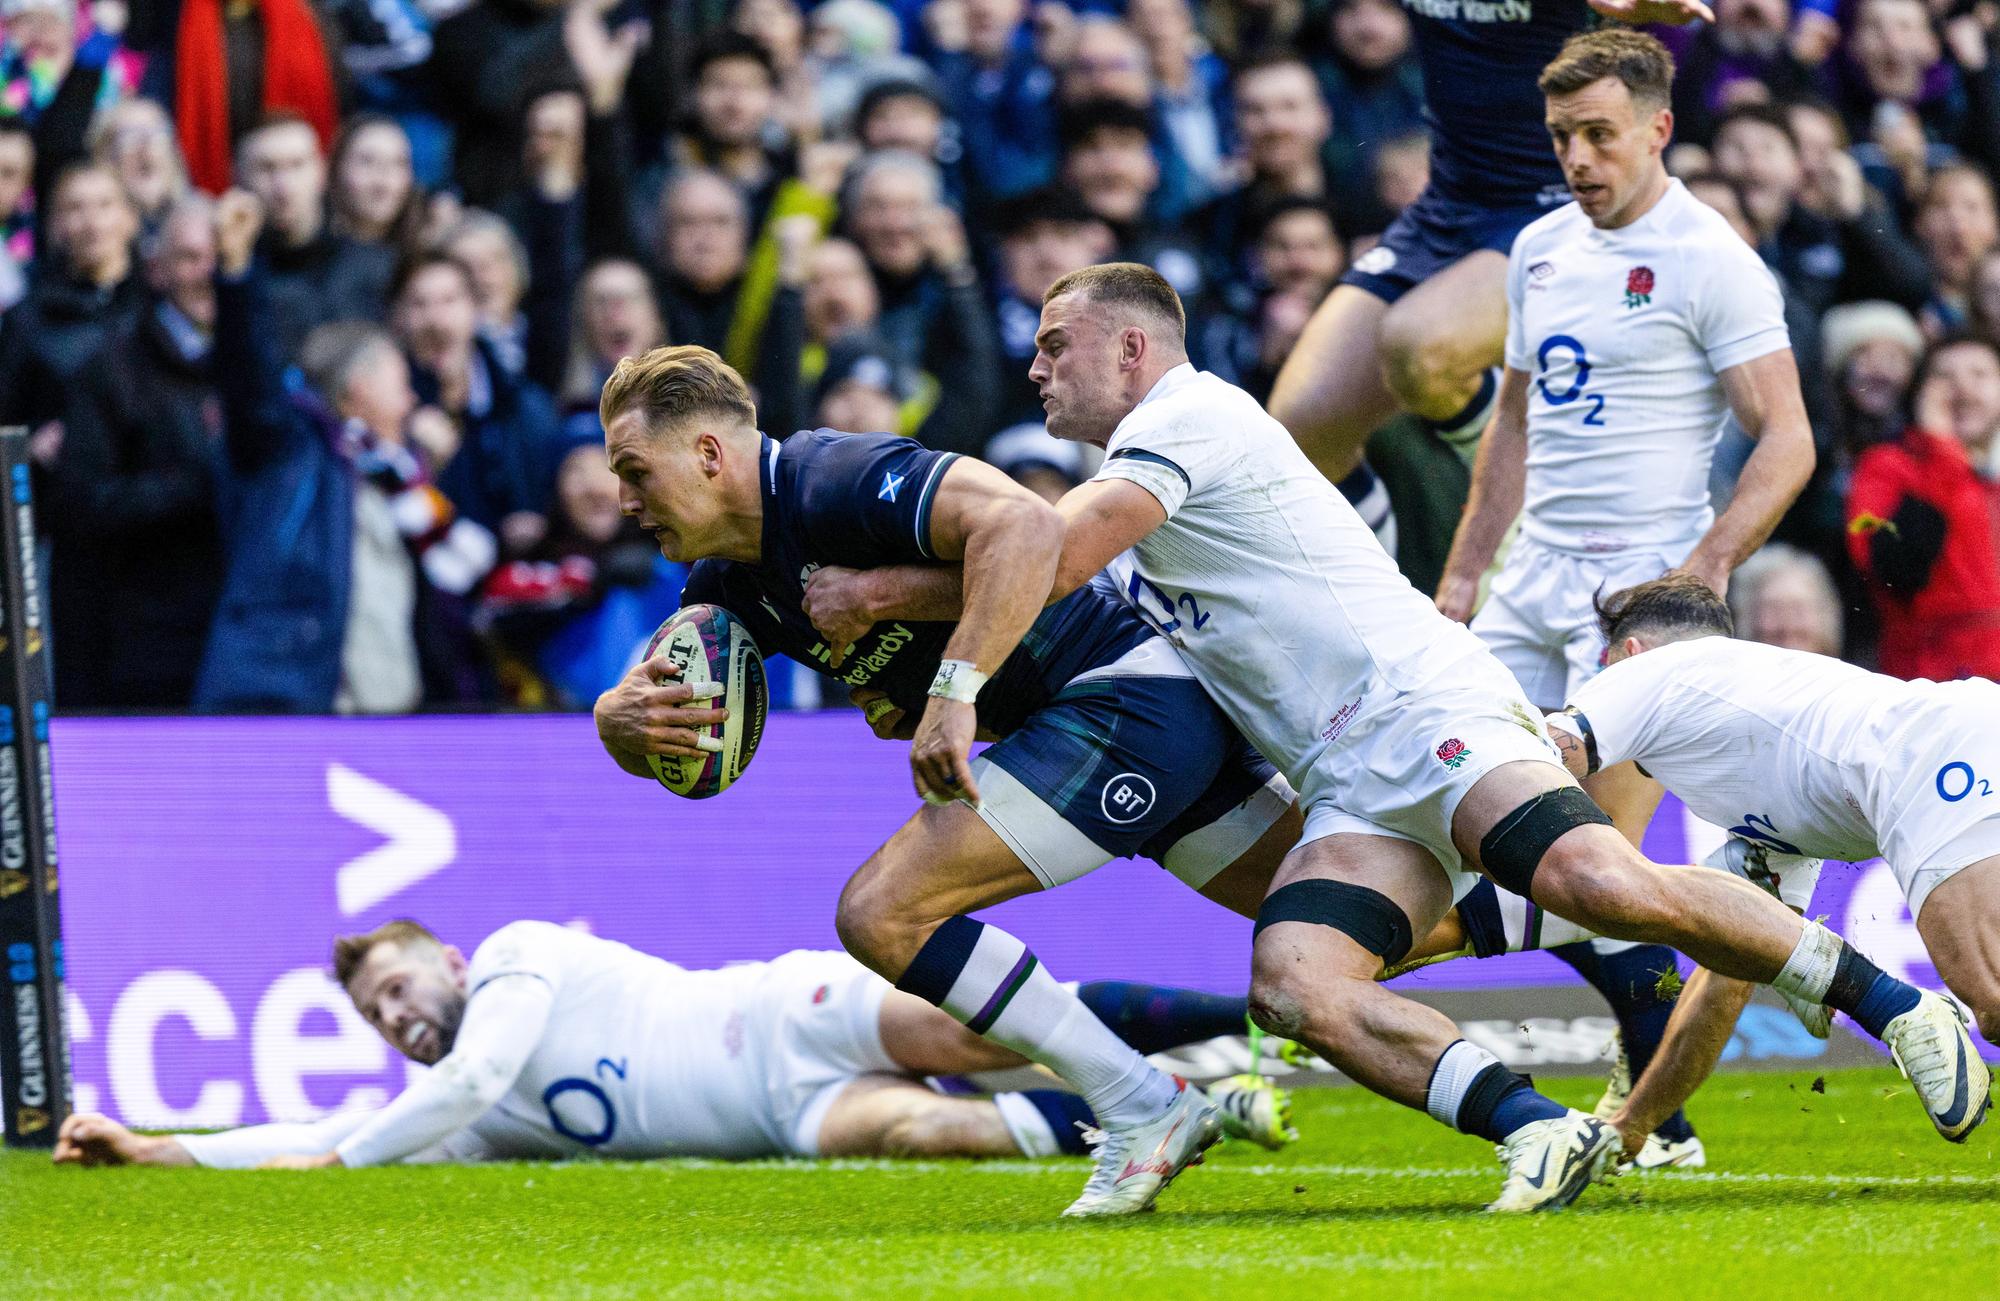 regal scotland revel in their crowning moment at murrayfield as england scalp taken once more